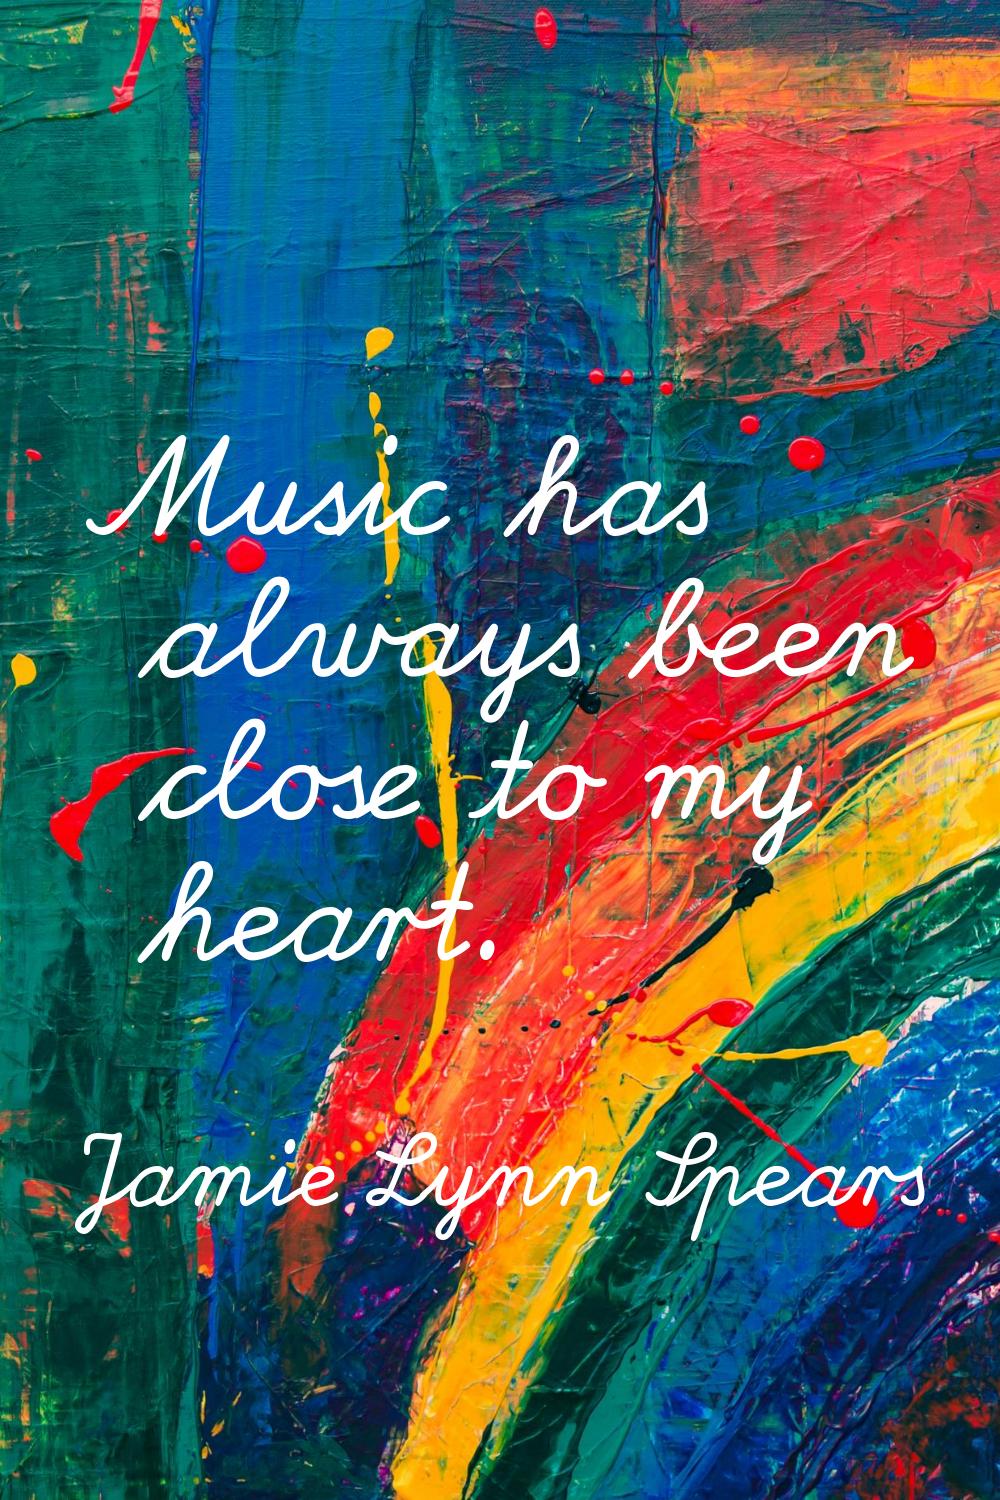 Music has always been close to my heart.